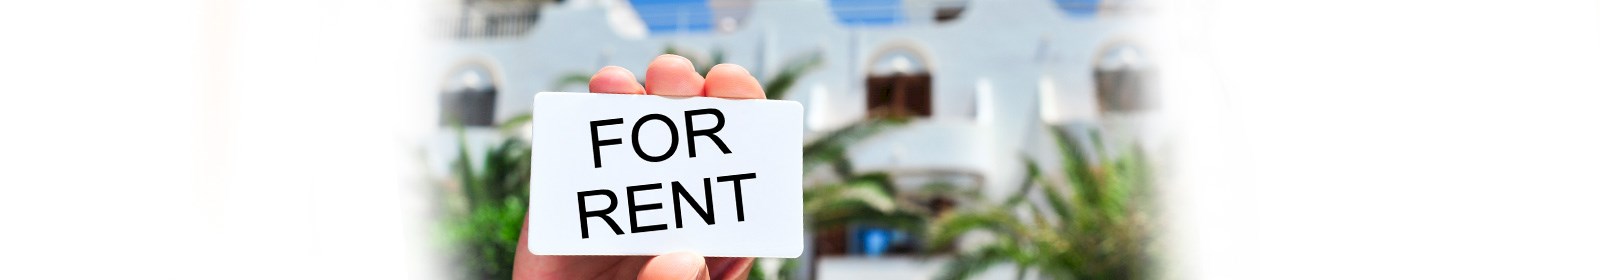 Guidelines on rental income payment